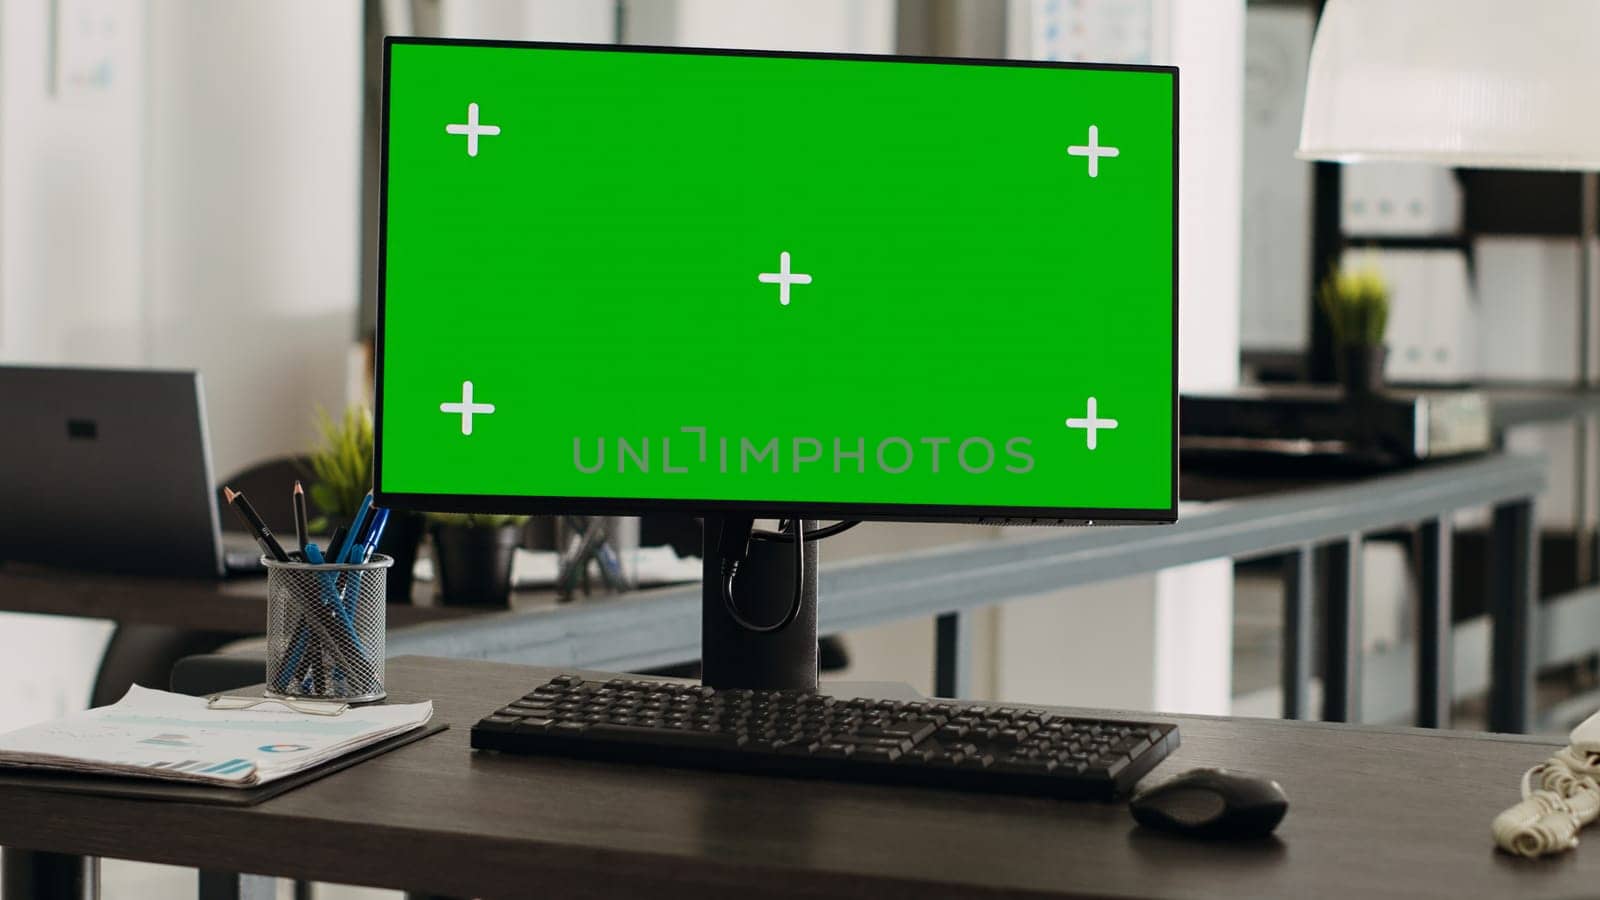 Workstation desk with greenscreen monitor in business agency office, empty coworking space with modern gadgets used for company operations. Computer showing chromakey and mockup template on display.